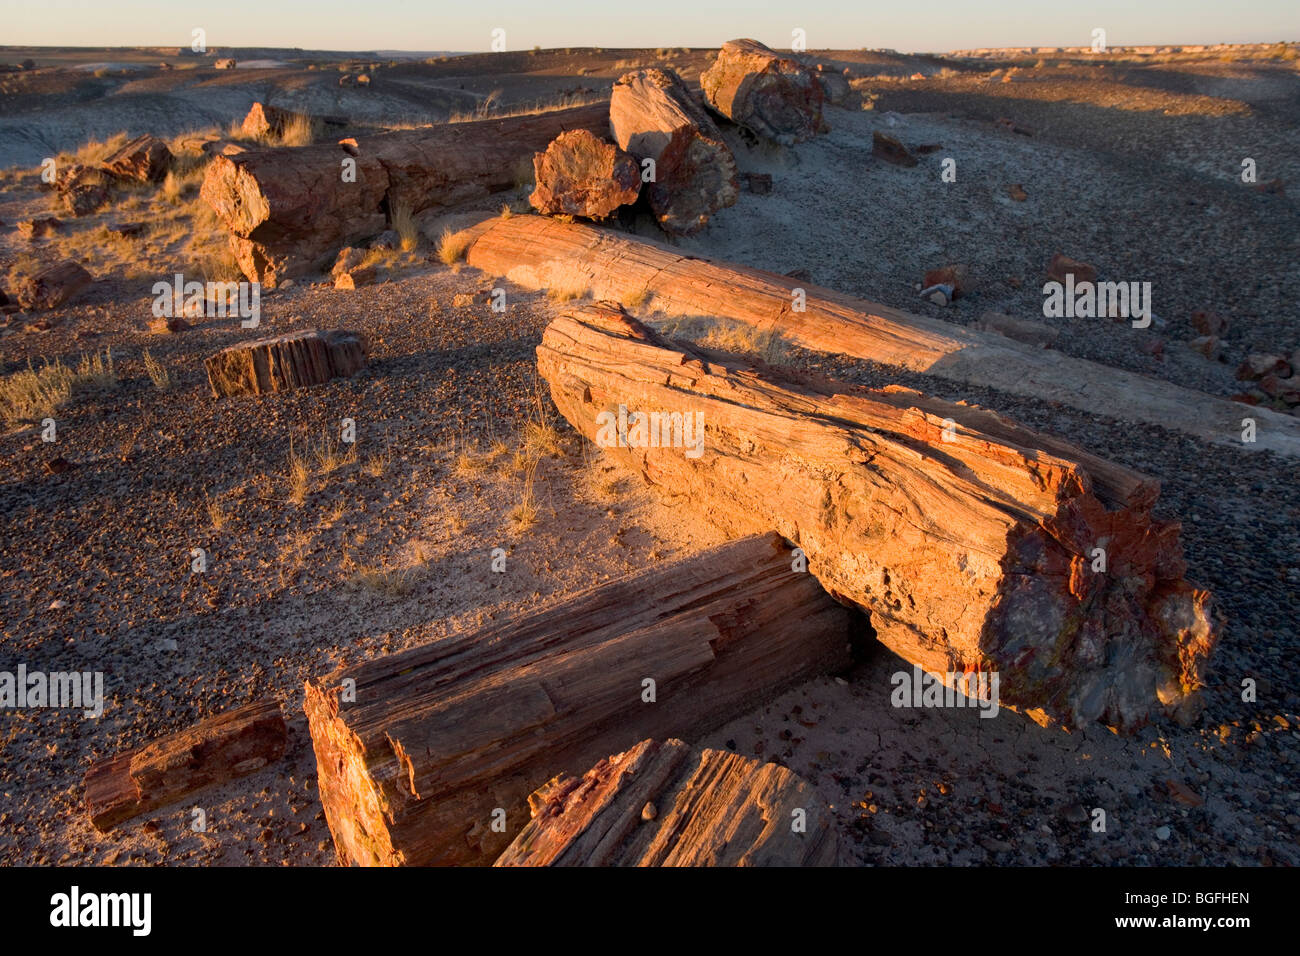 Whole and broken petrified logs at Petrified Forest National Park in Arizona, USA. Stock Photo